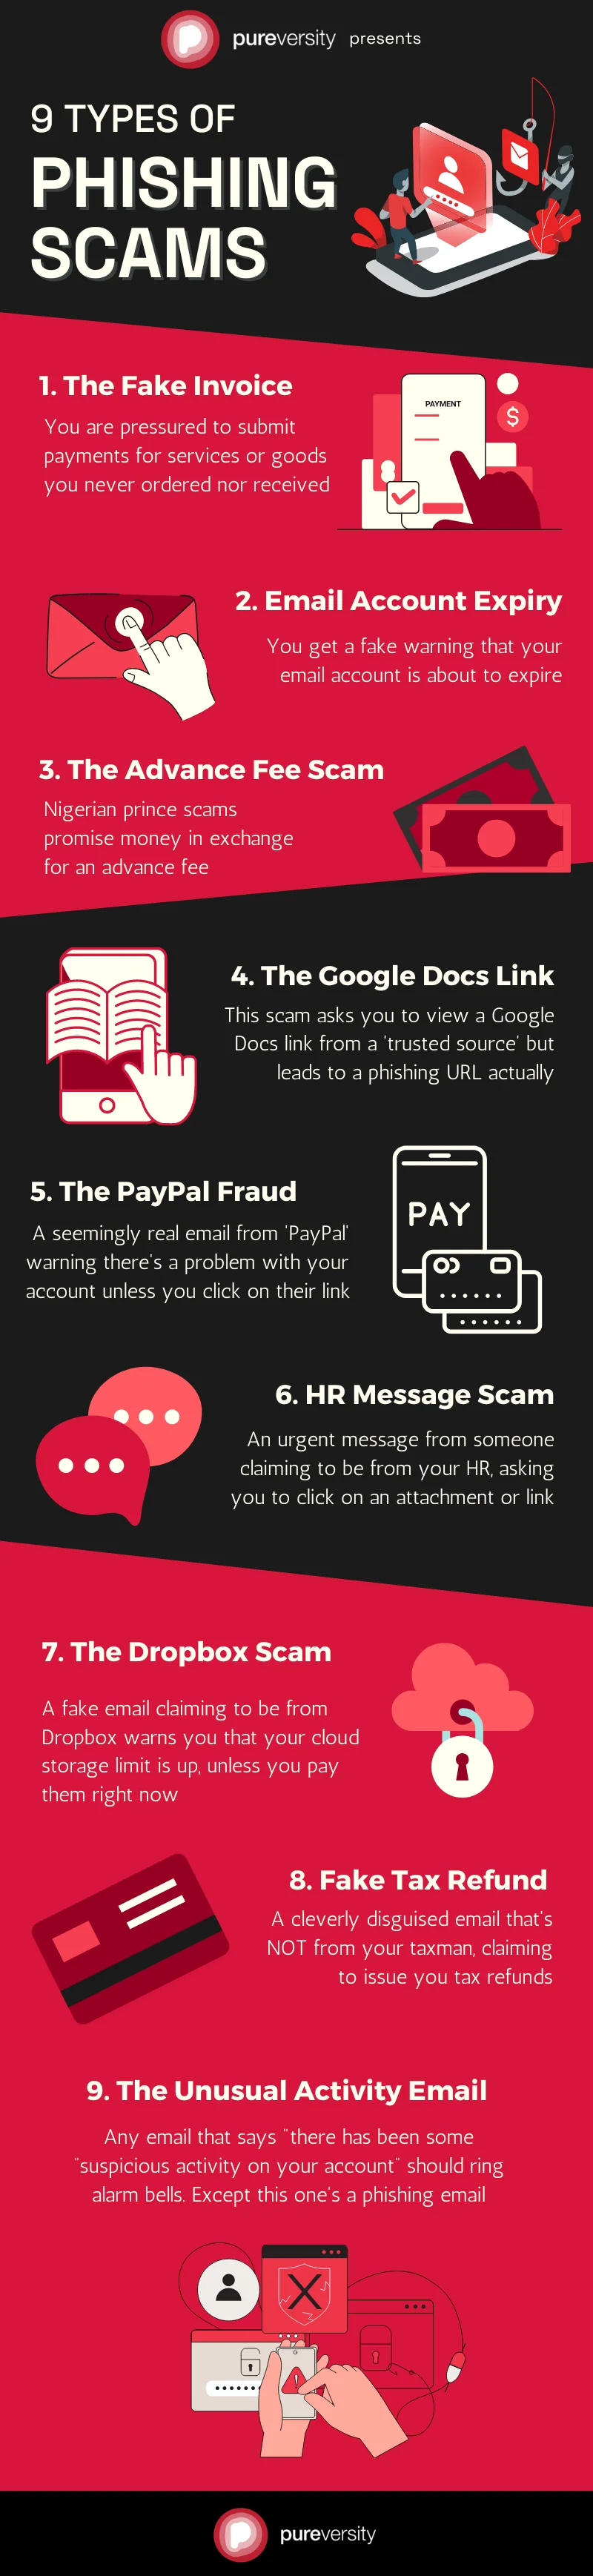 An infographic listing the types of phishing scams